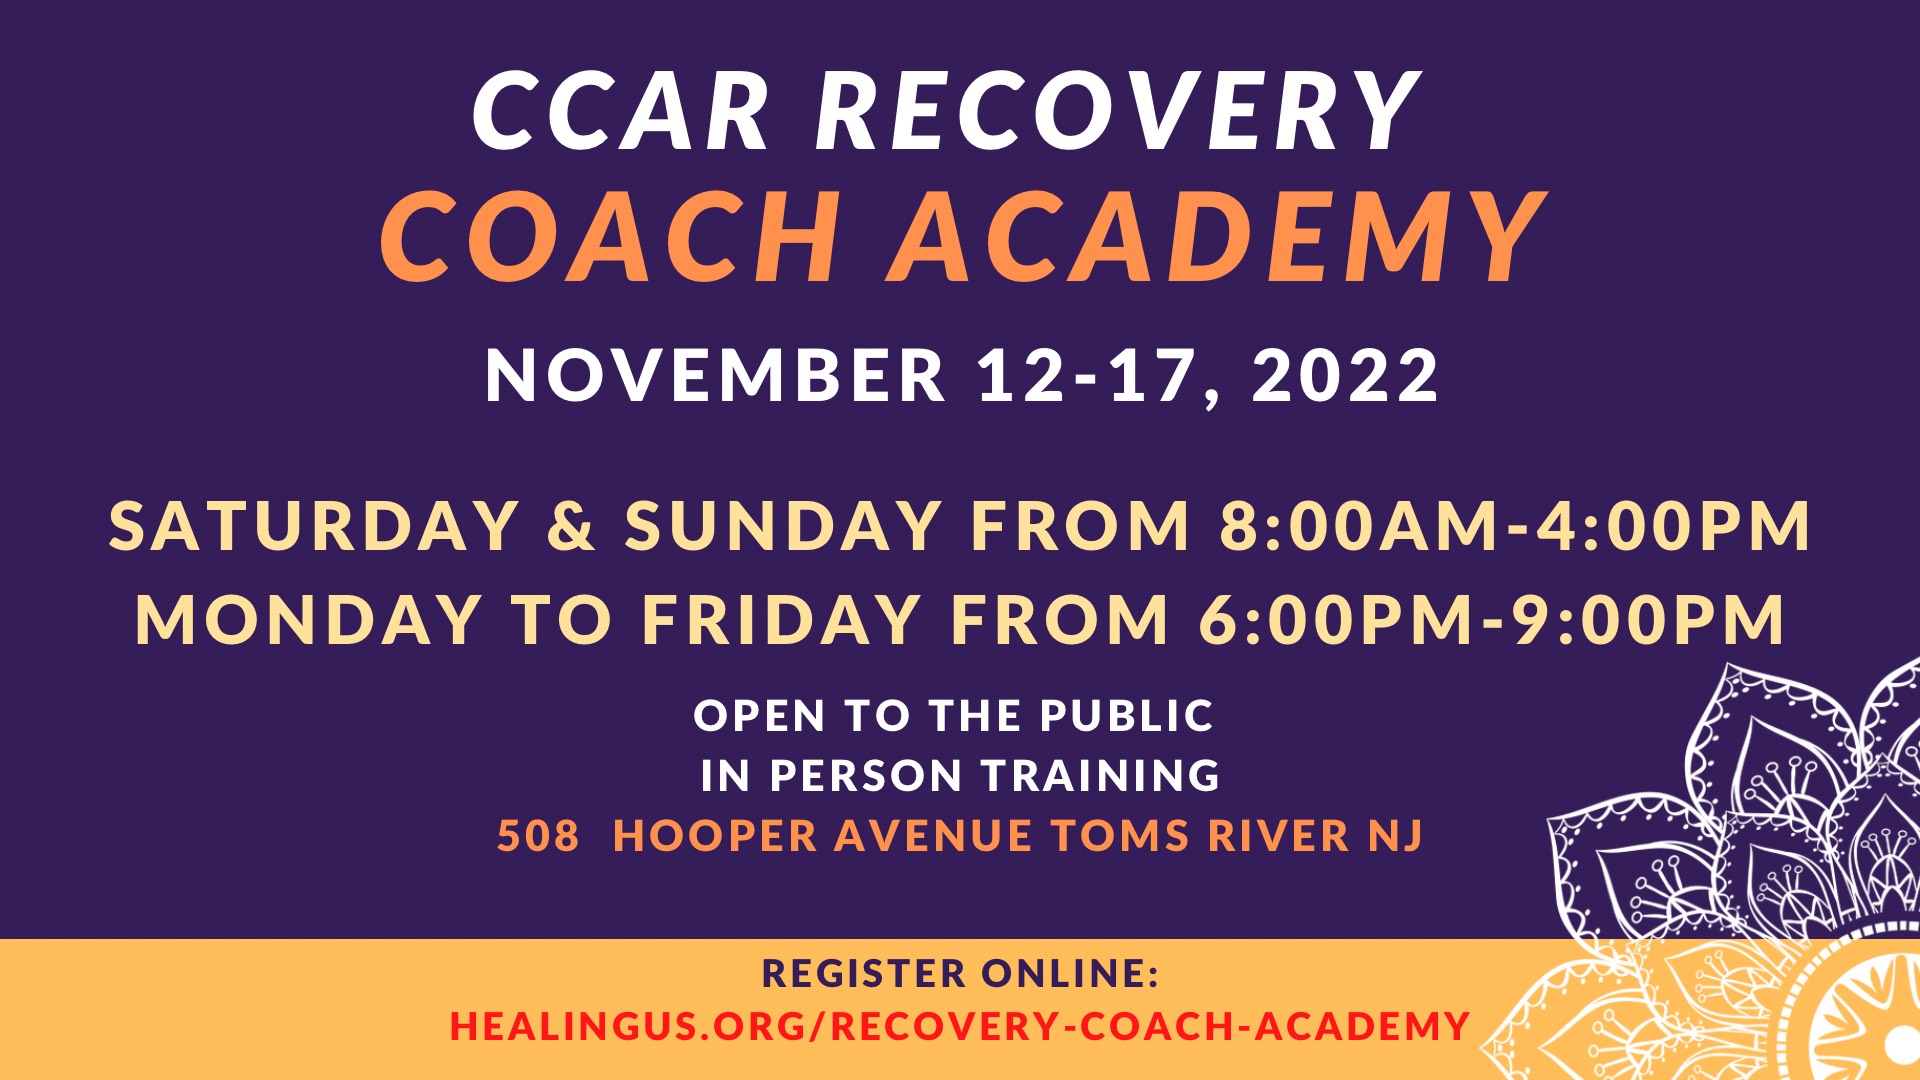 CCAR Recovery Coach Academy - CFC Recovery